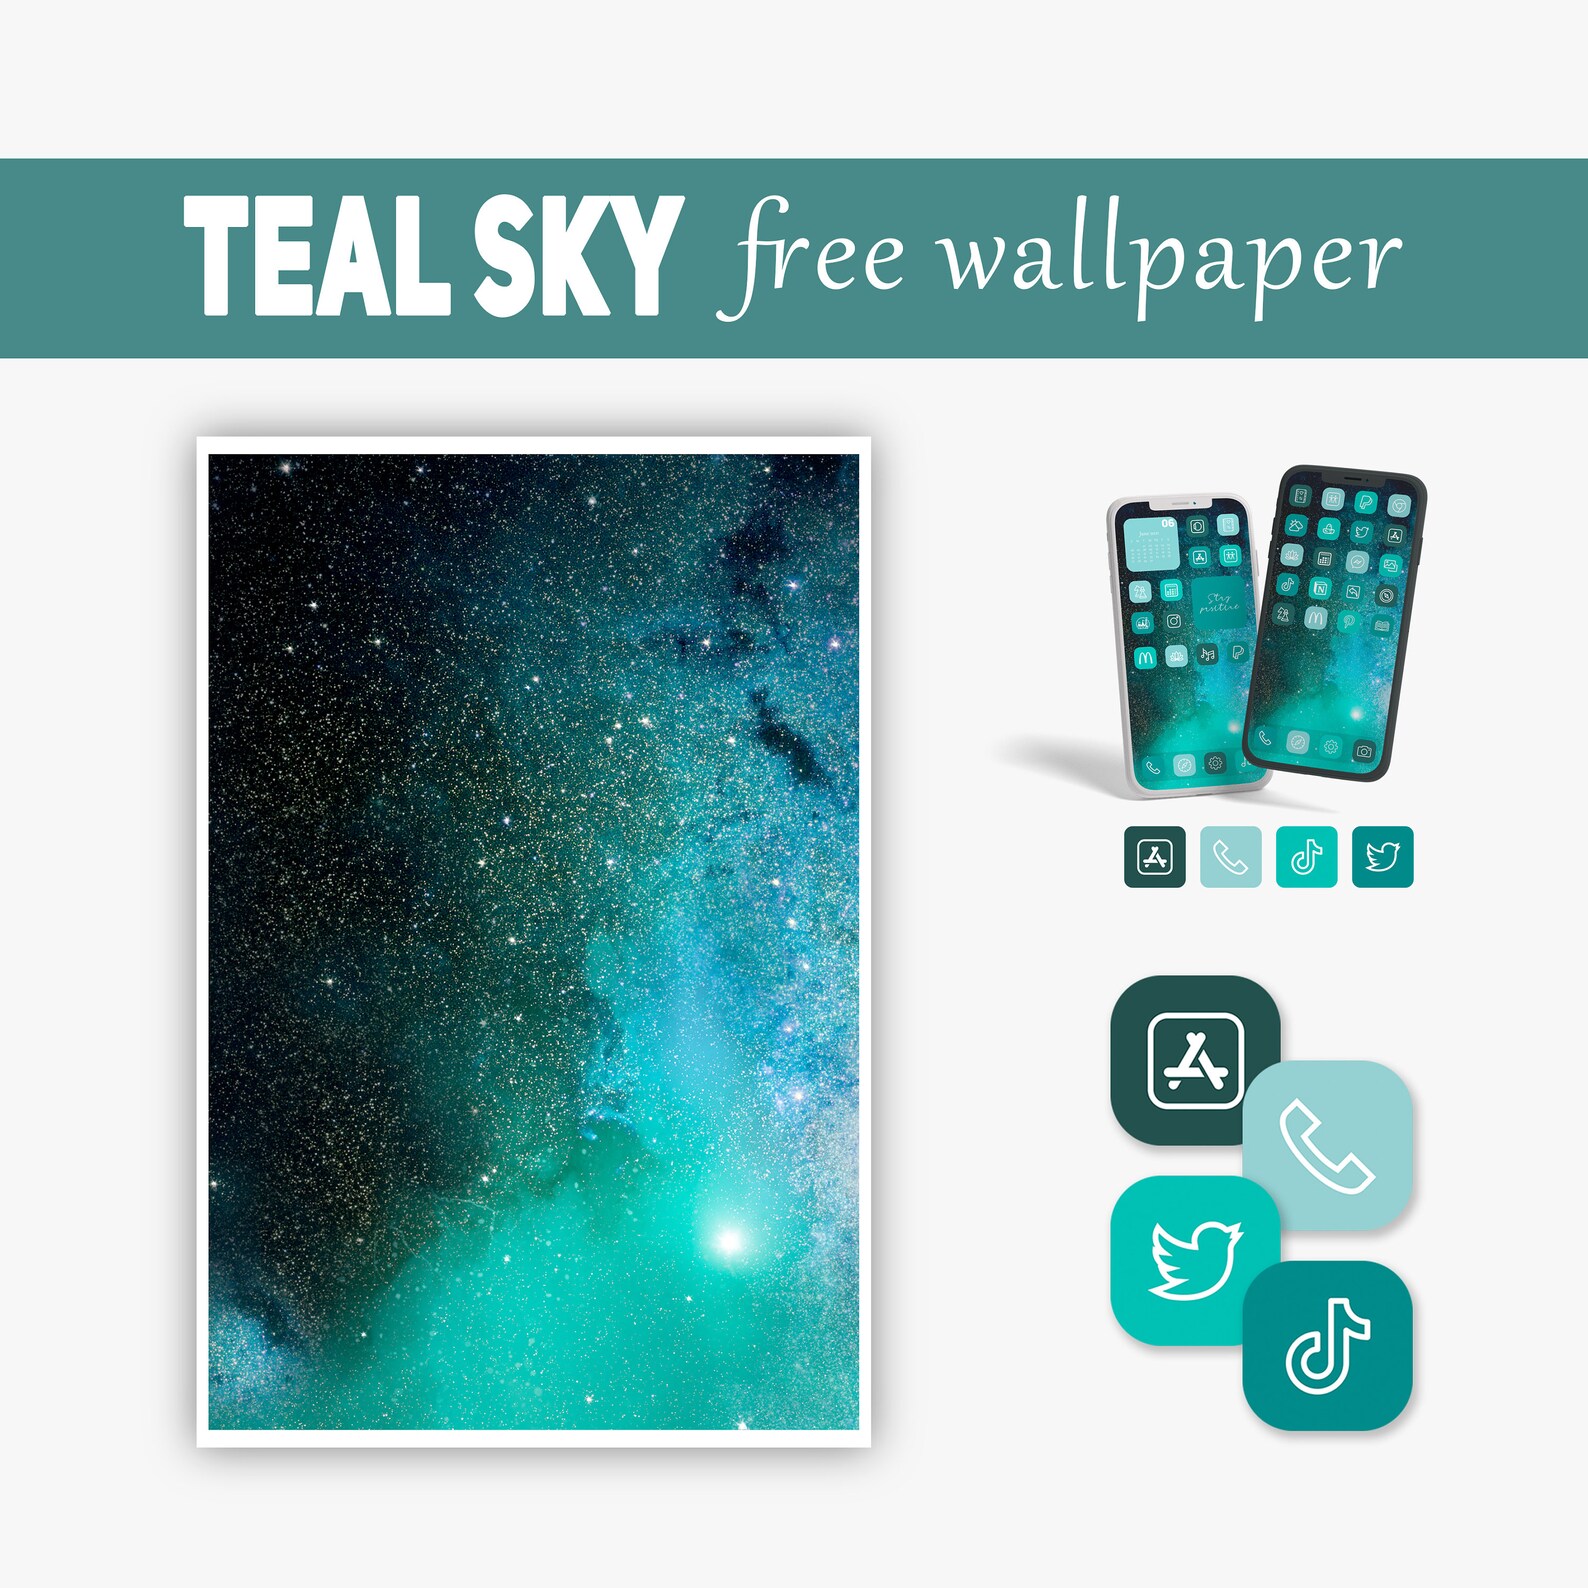 Teal sky app icons collection widget iphone home screen app | Etsy